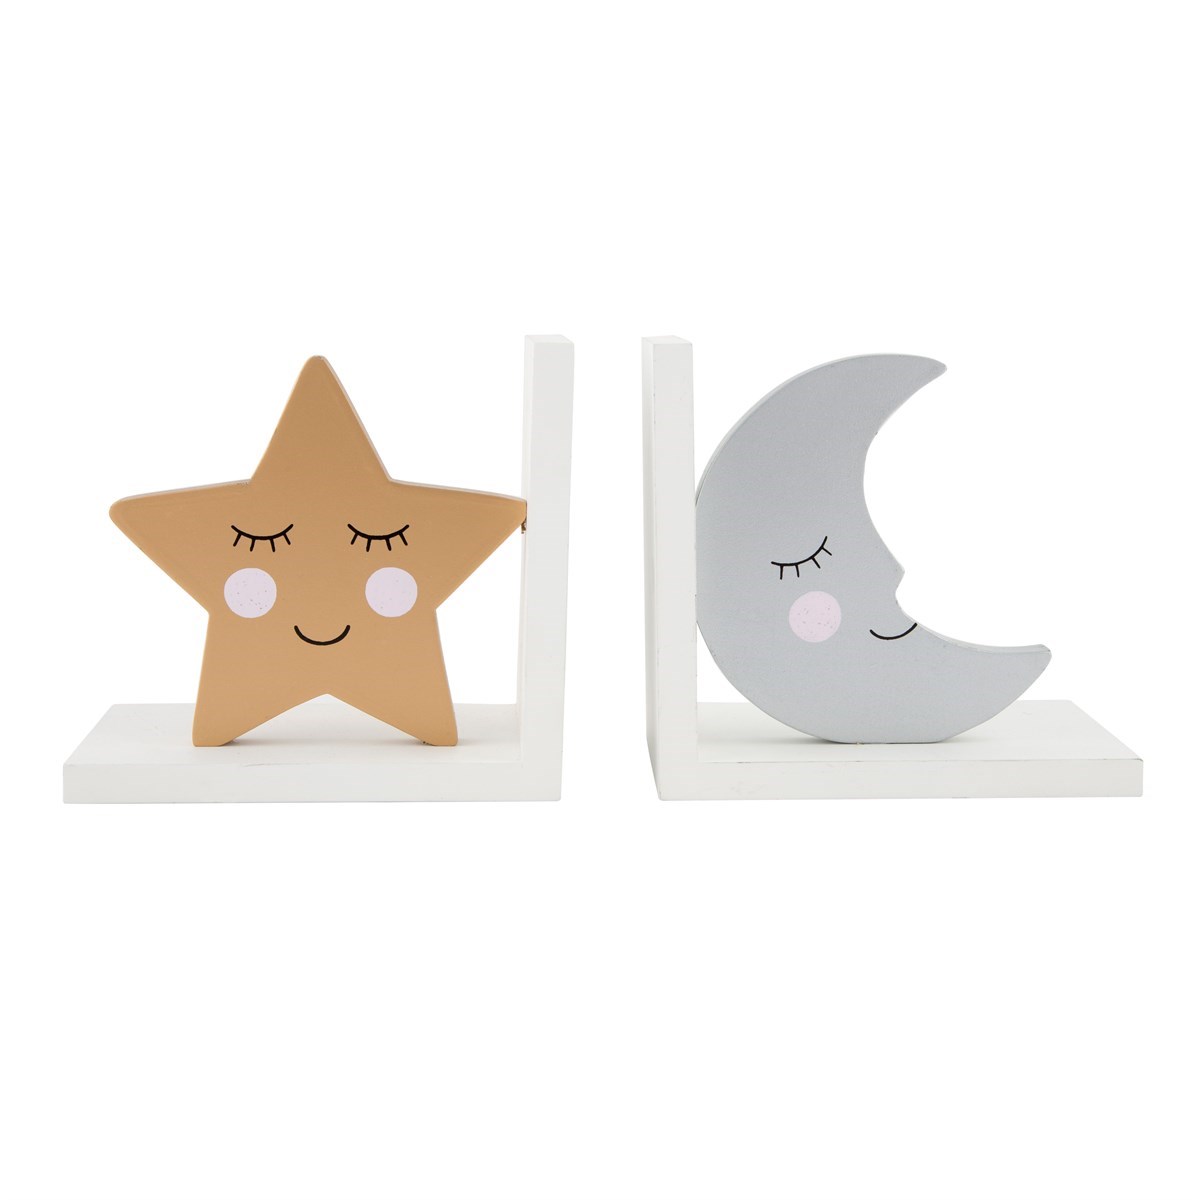 Moon & star bookends